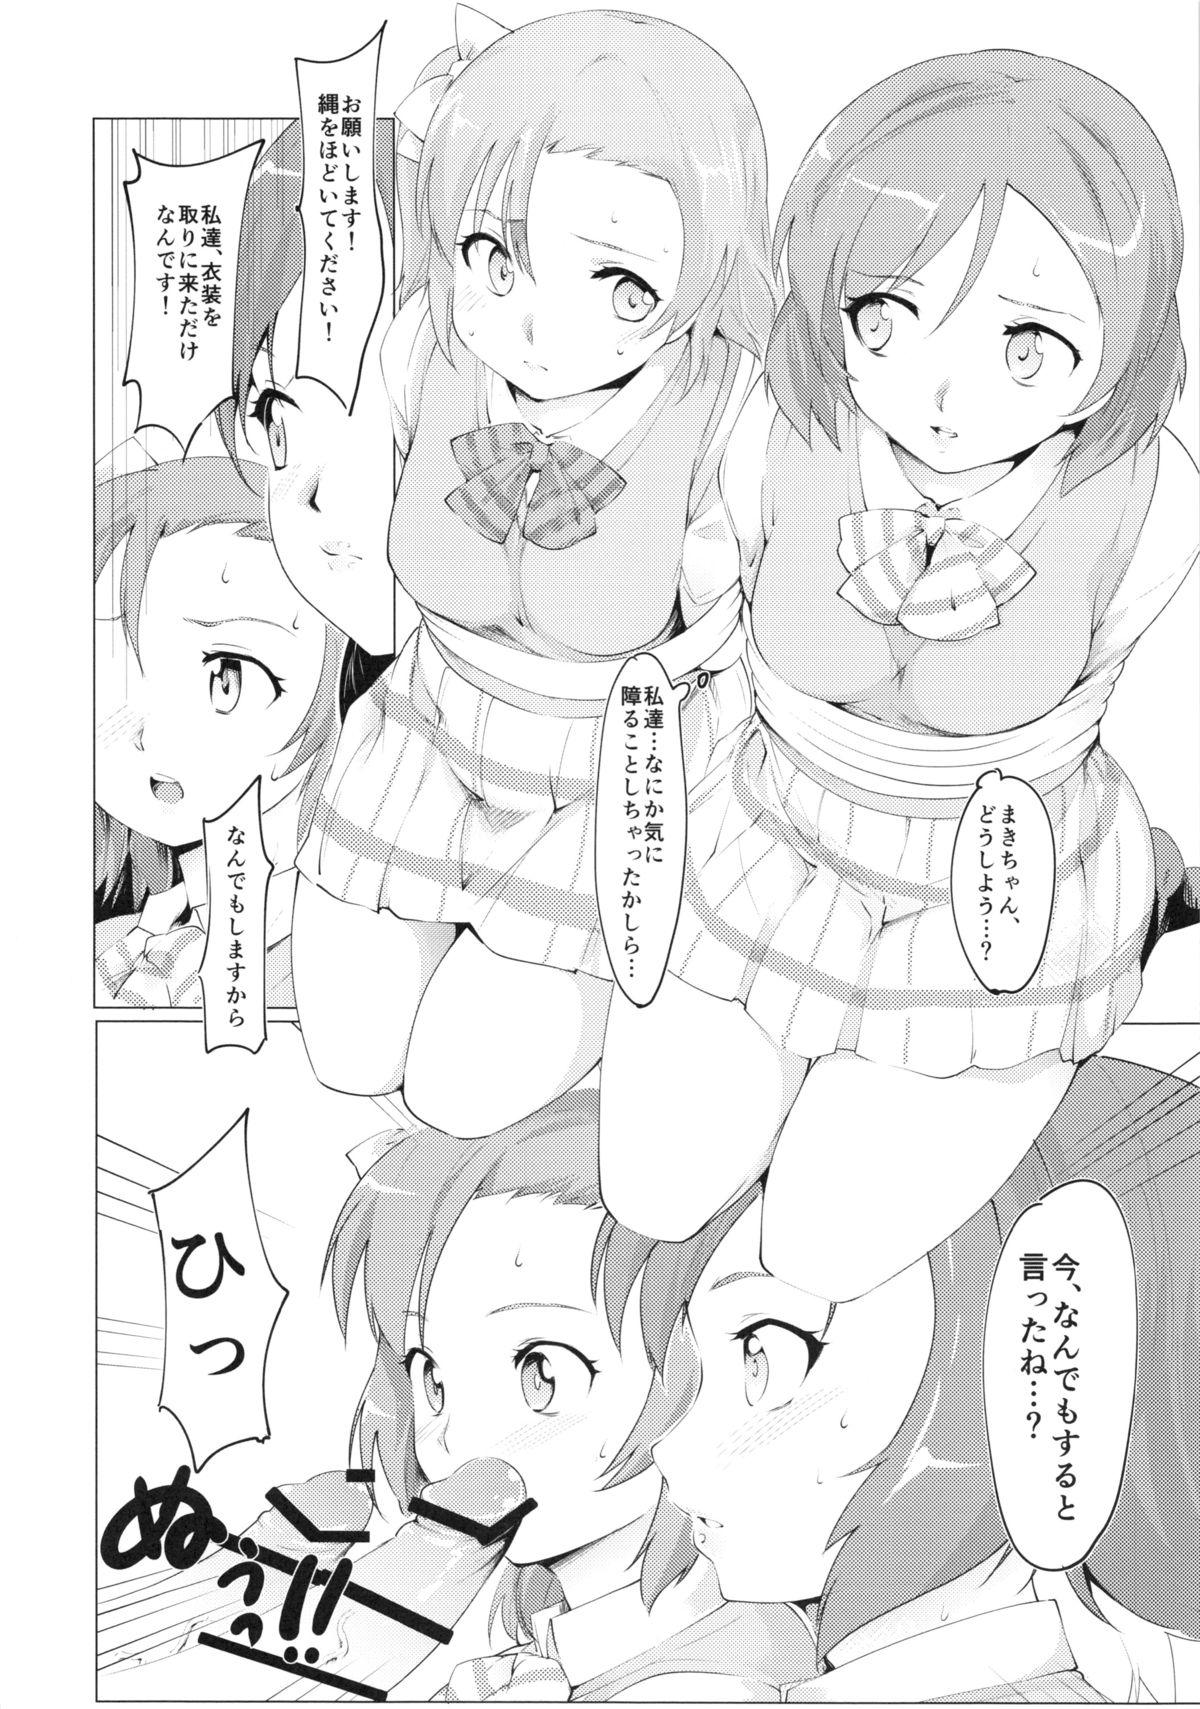 Stripping Maki-chan Pinch!! - Love live Transsexual - Page 5